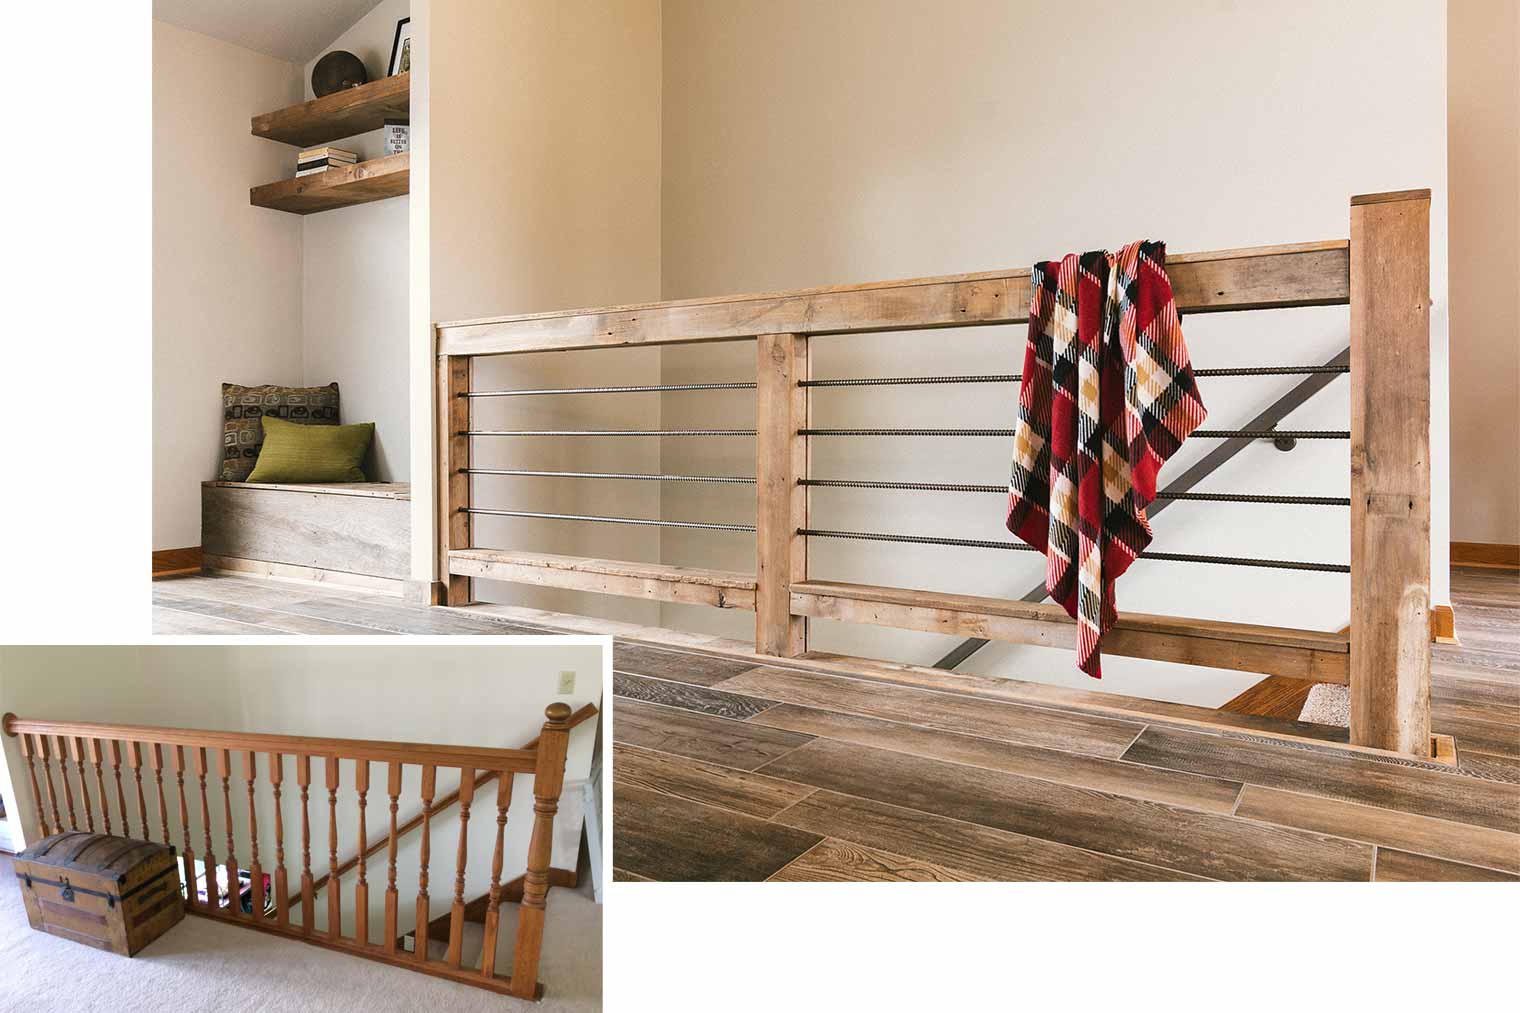 rustic fence like stair railing before and after featuring horizontal rebar spindles, barn wood storage bench built in, designed by Silent Rivers in central Iowa for a rural Iowa retreat